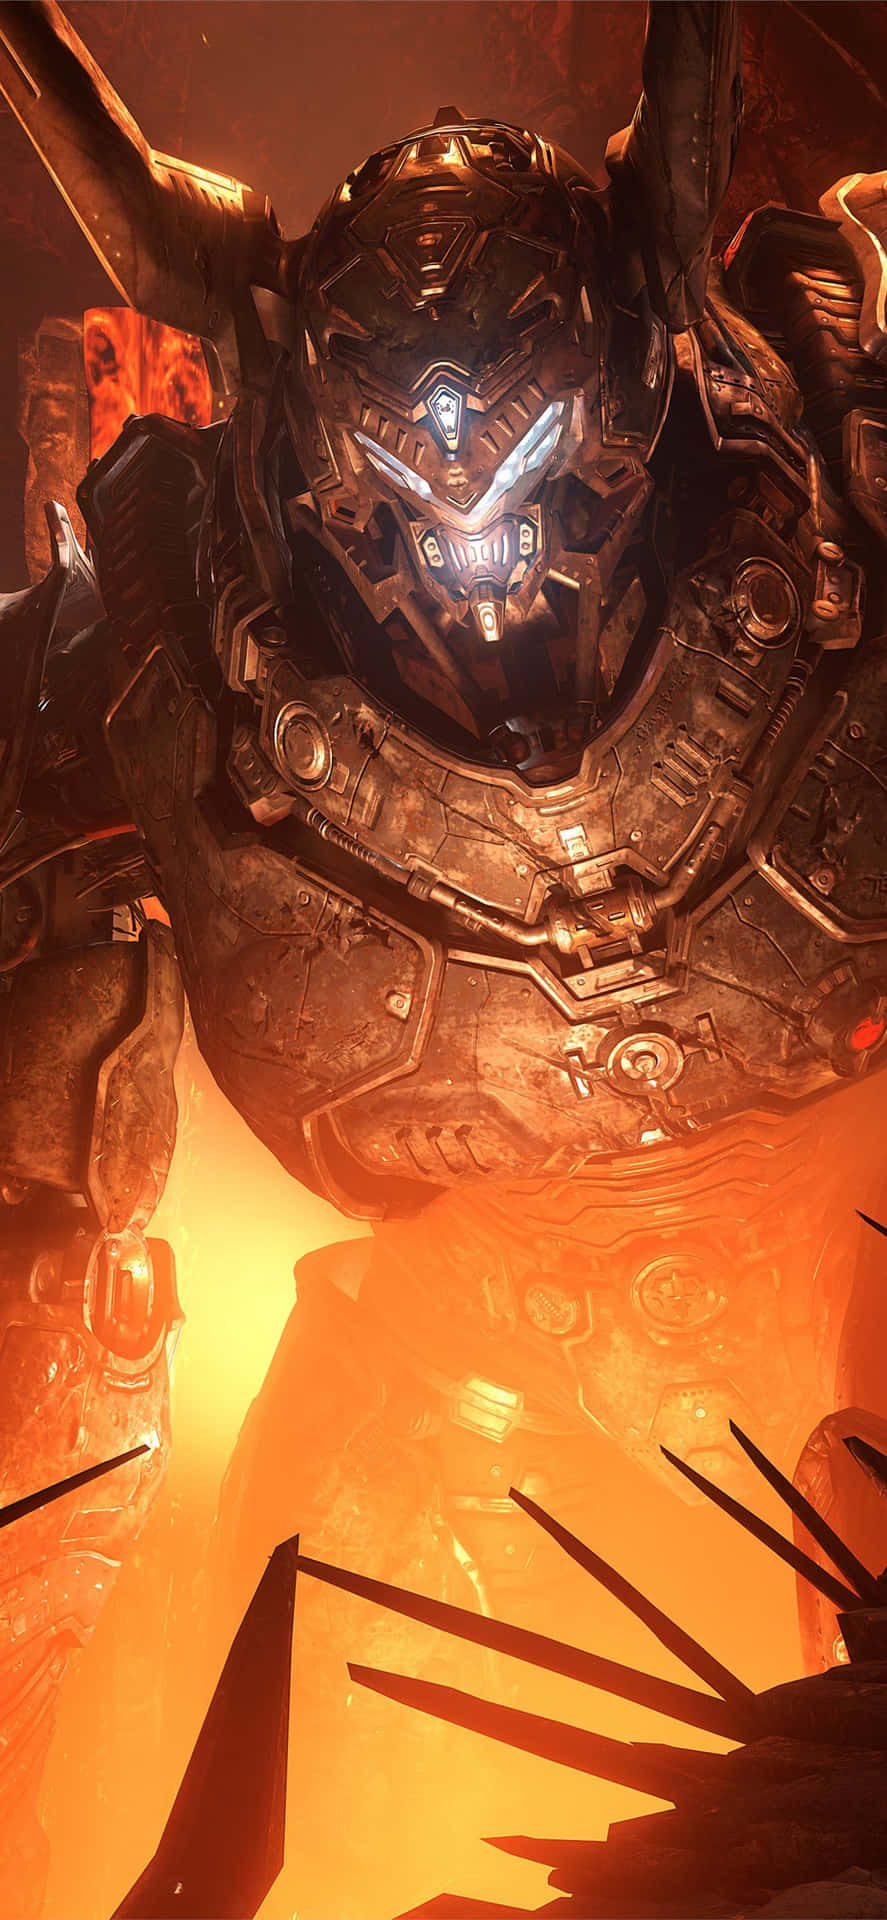 A Large Robot With Horns In Front Of A Fire Wallpaper